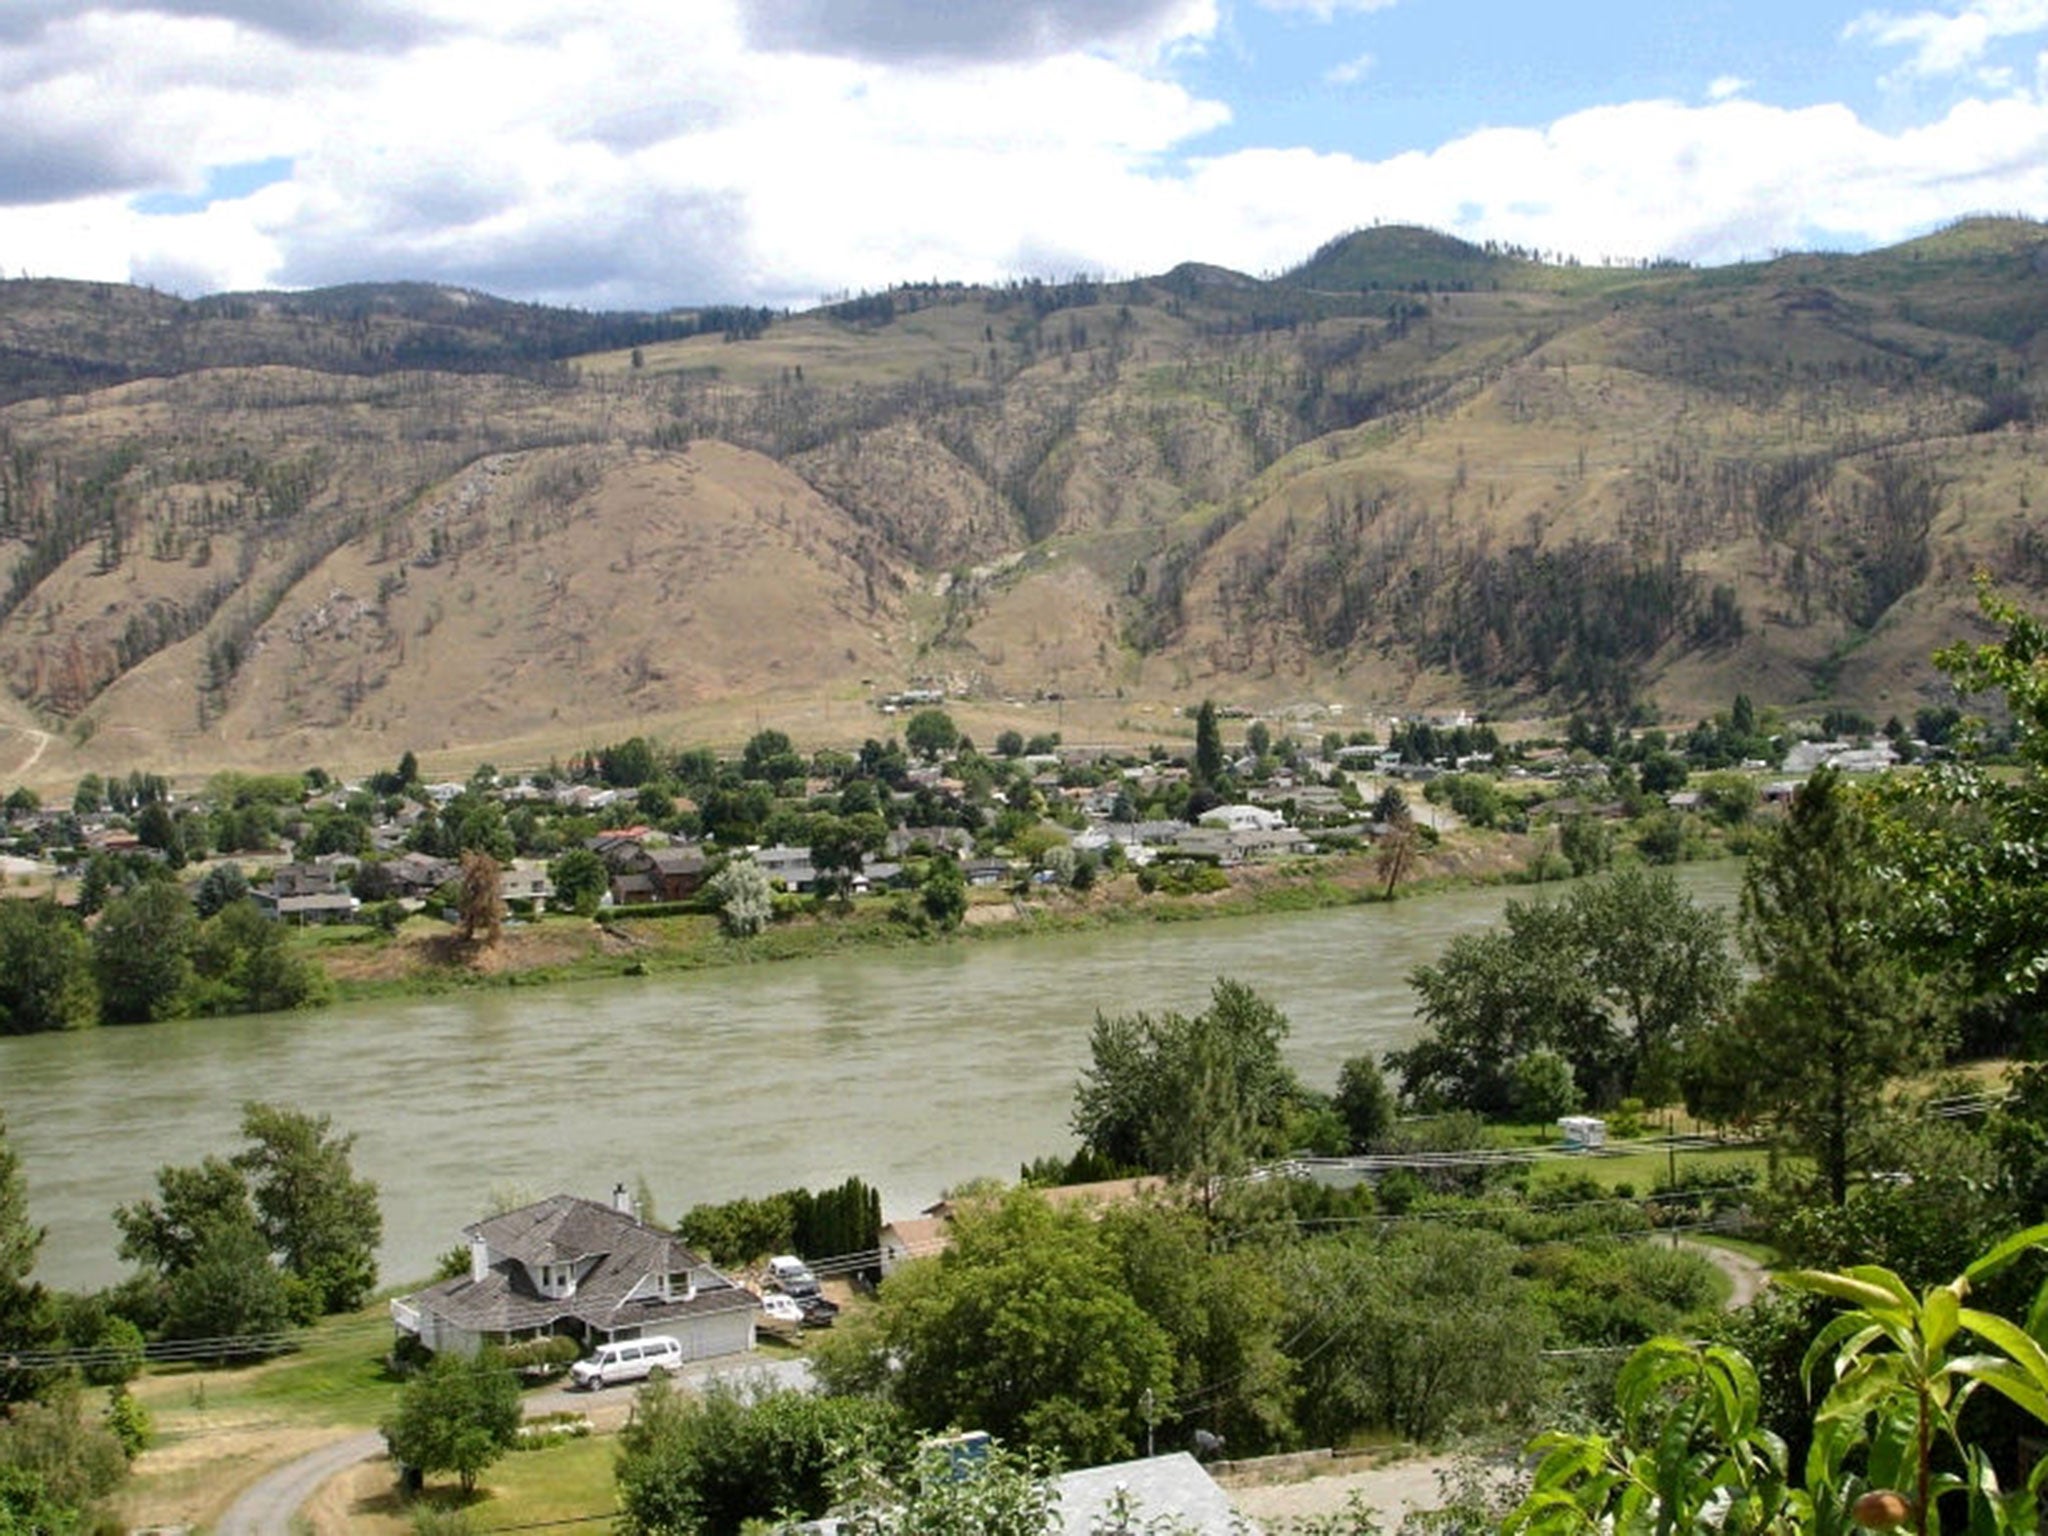 Kamloops in British Columbia Canada, where the ranch is located